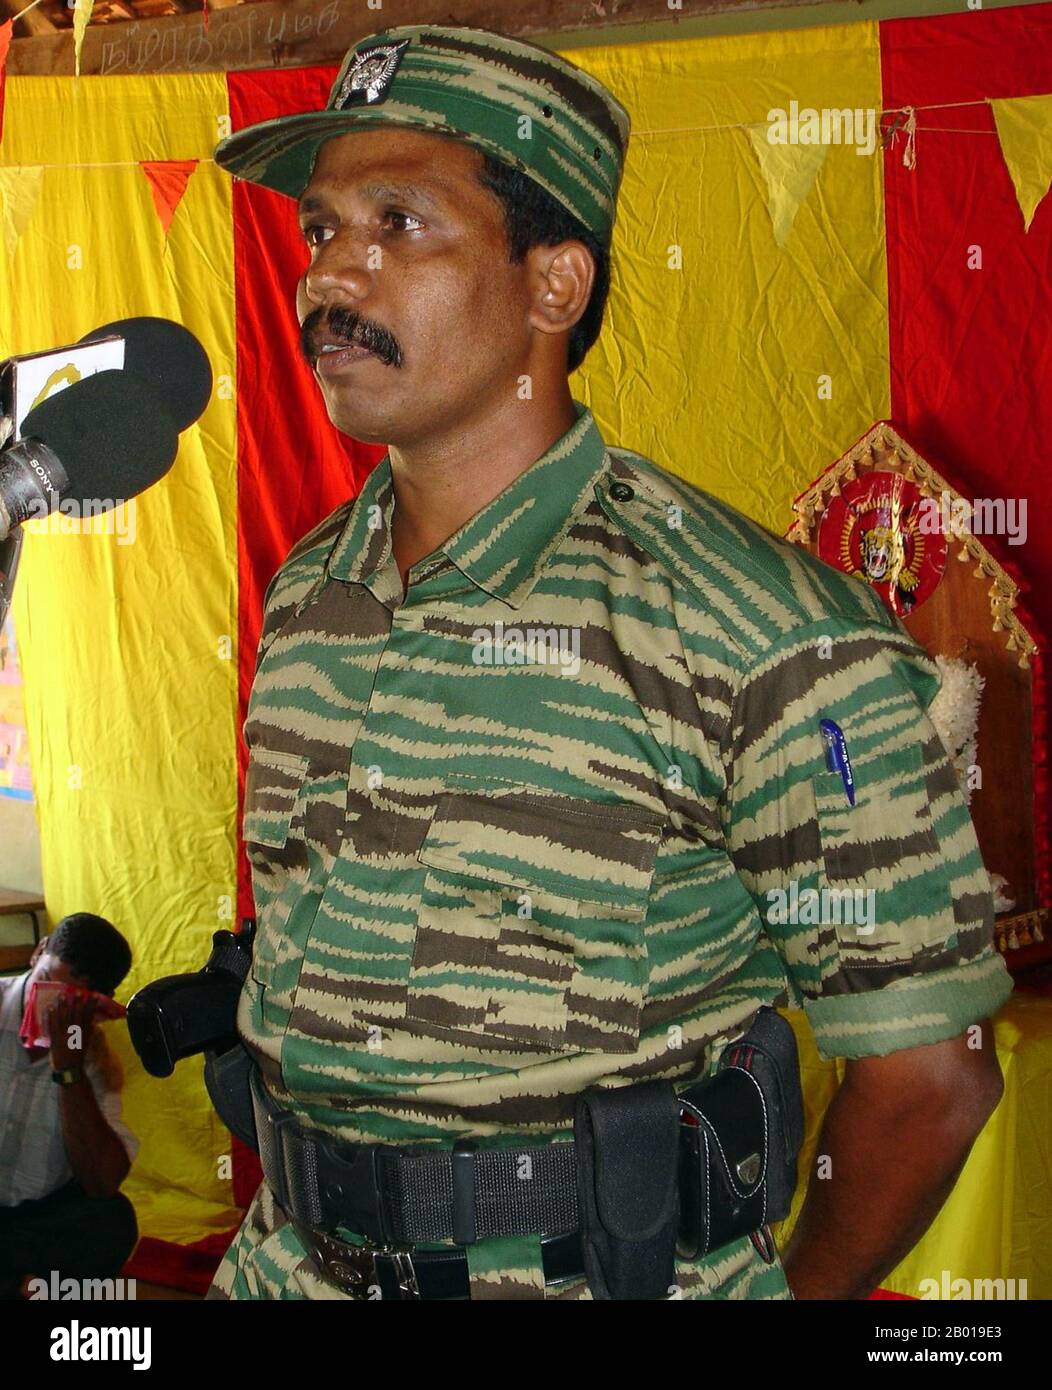 Sri Lanka: Senior LTTE Cadre Commander Colonel Ramesh addressing a Tamil Tiger gathering, c. 2008.  Colonel Ramesh was the LTTE commander for Batticaloa and Ampara districts during the 2002 ceasefire era. It is believed he was killed in May 2009 during the last phase of the Sri Lanka Civil War. Stock Photo